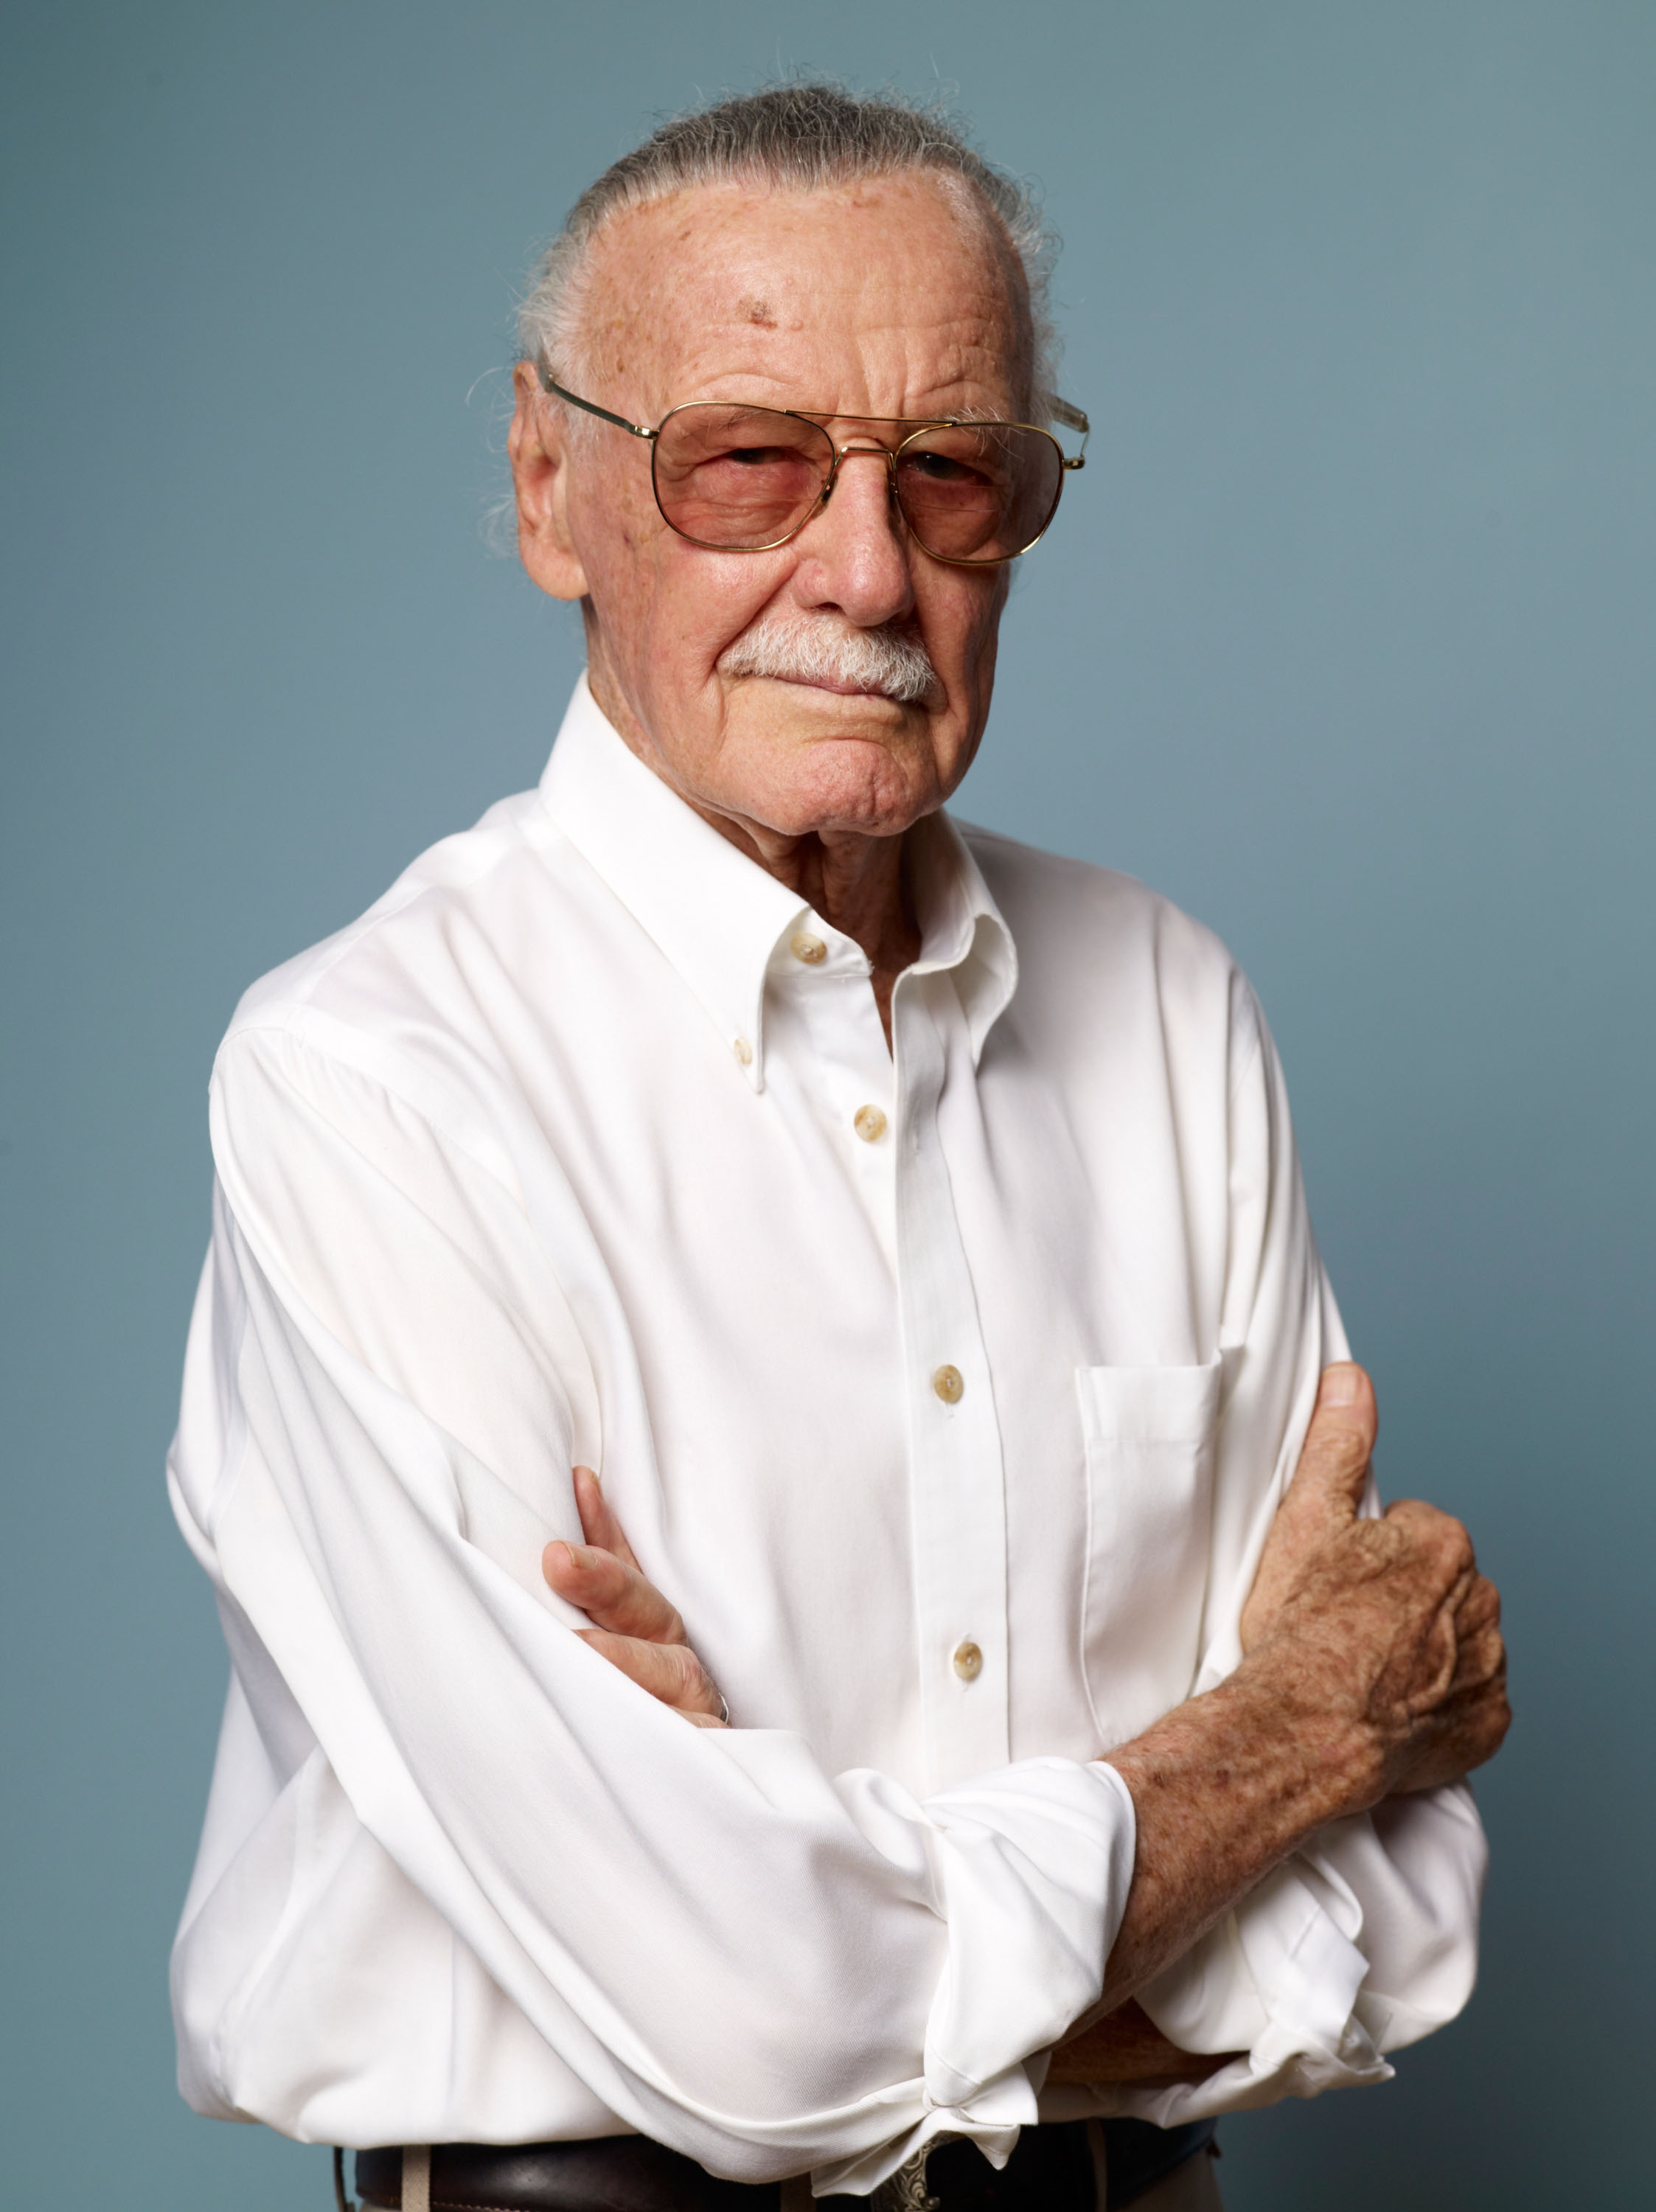 Times Stan Lee Was A Total Boss